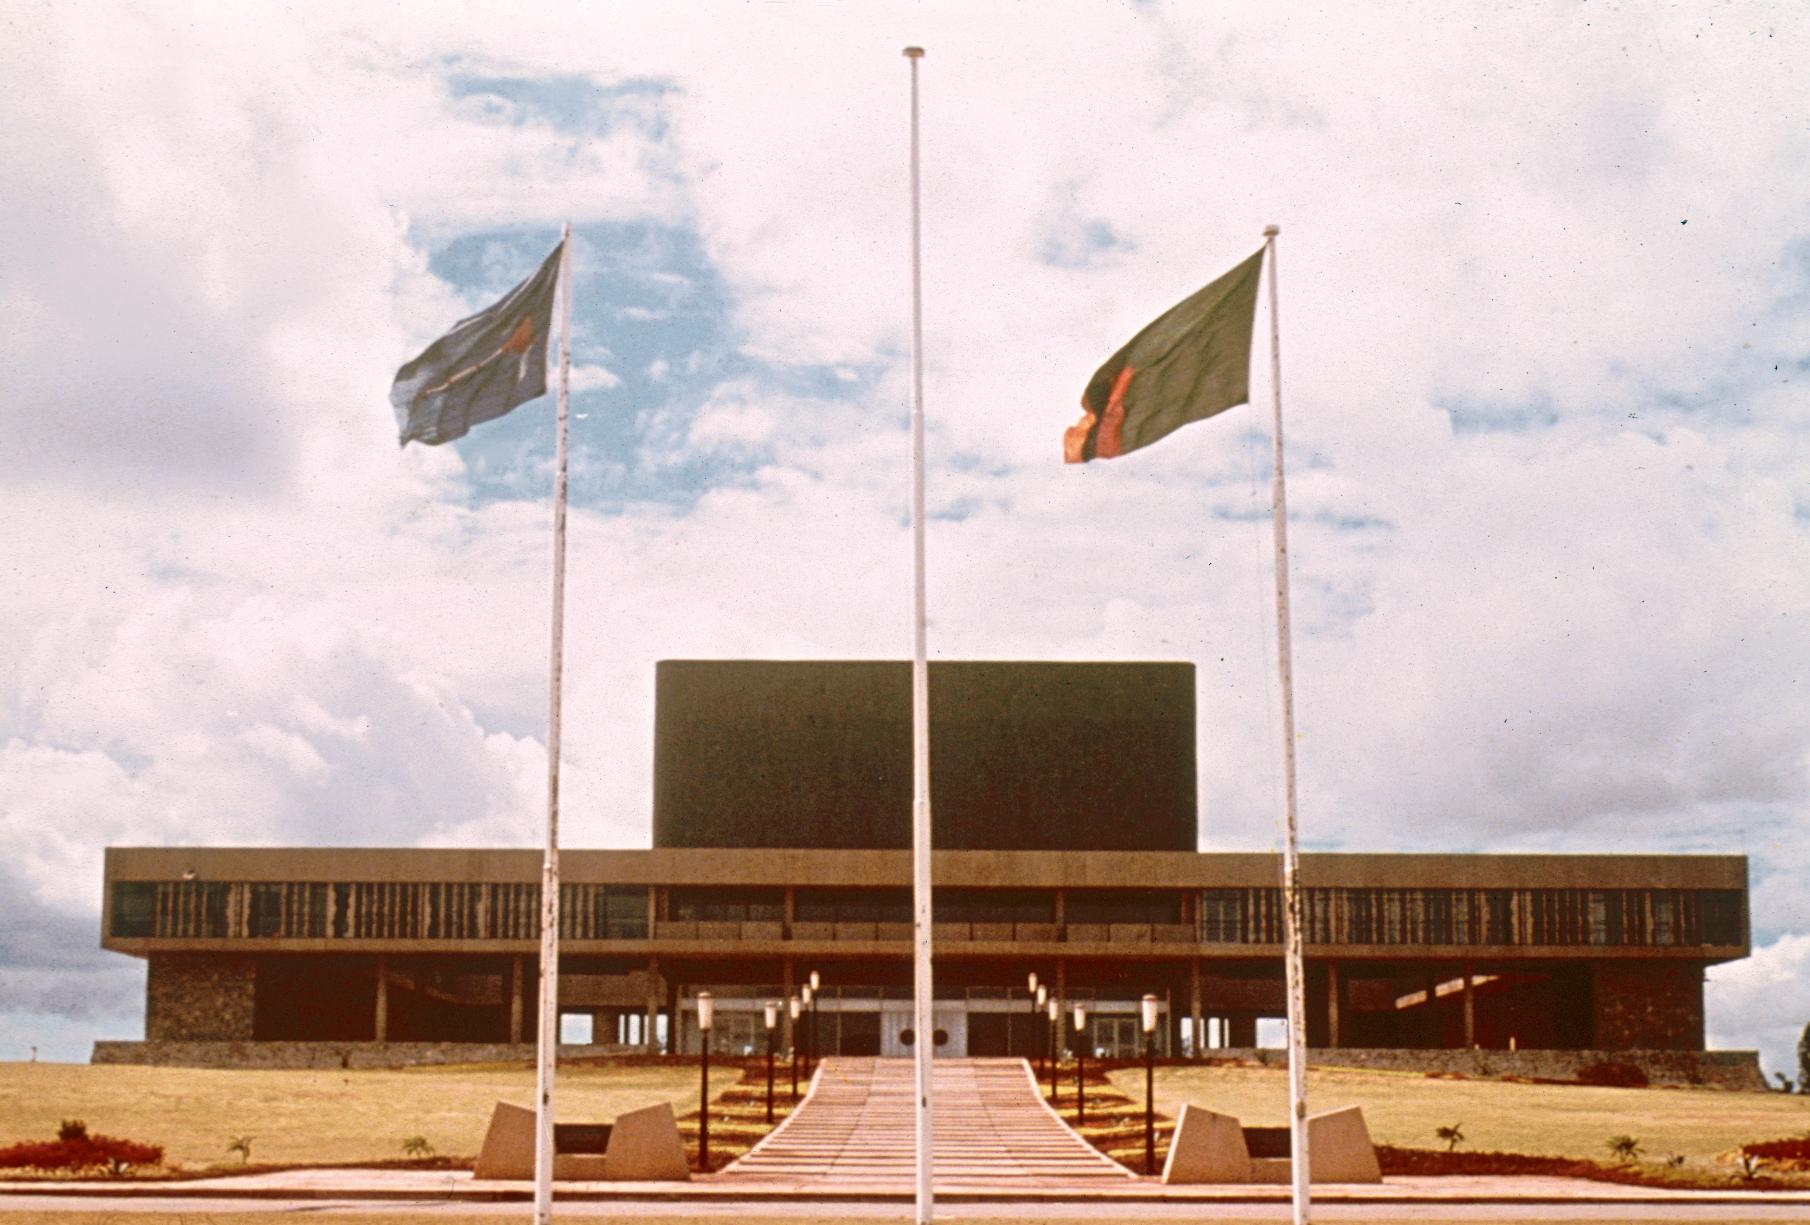 The National Assembly Building in Lusaka